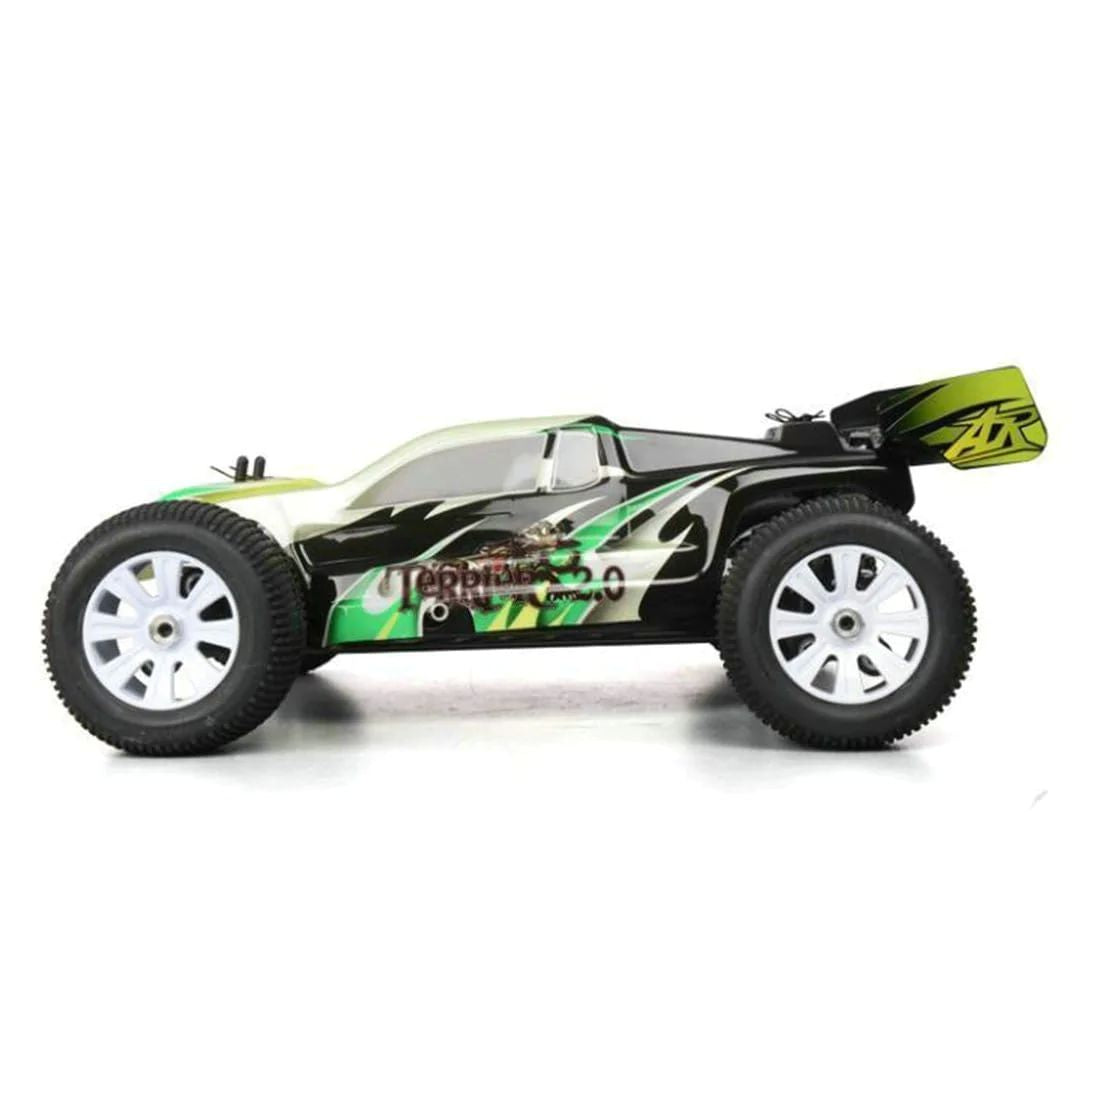 FS Racing 31348 PRO Nitro Engine RC Car 1/18 2.4G 4WD High Speed Off-Road Vehicle with 25CXP